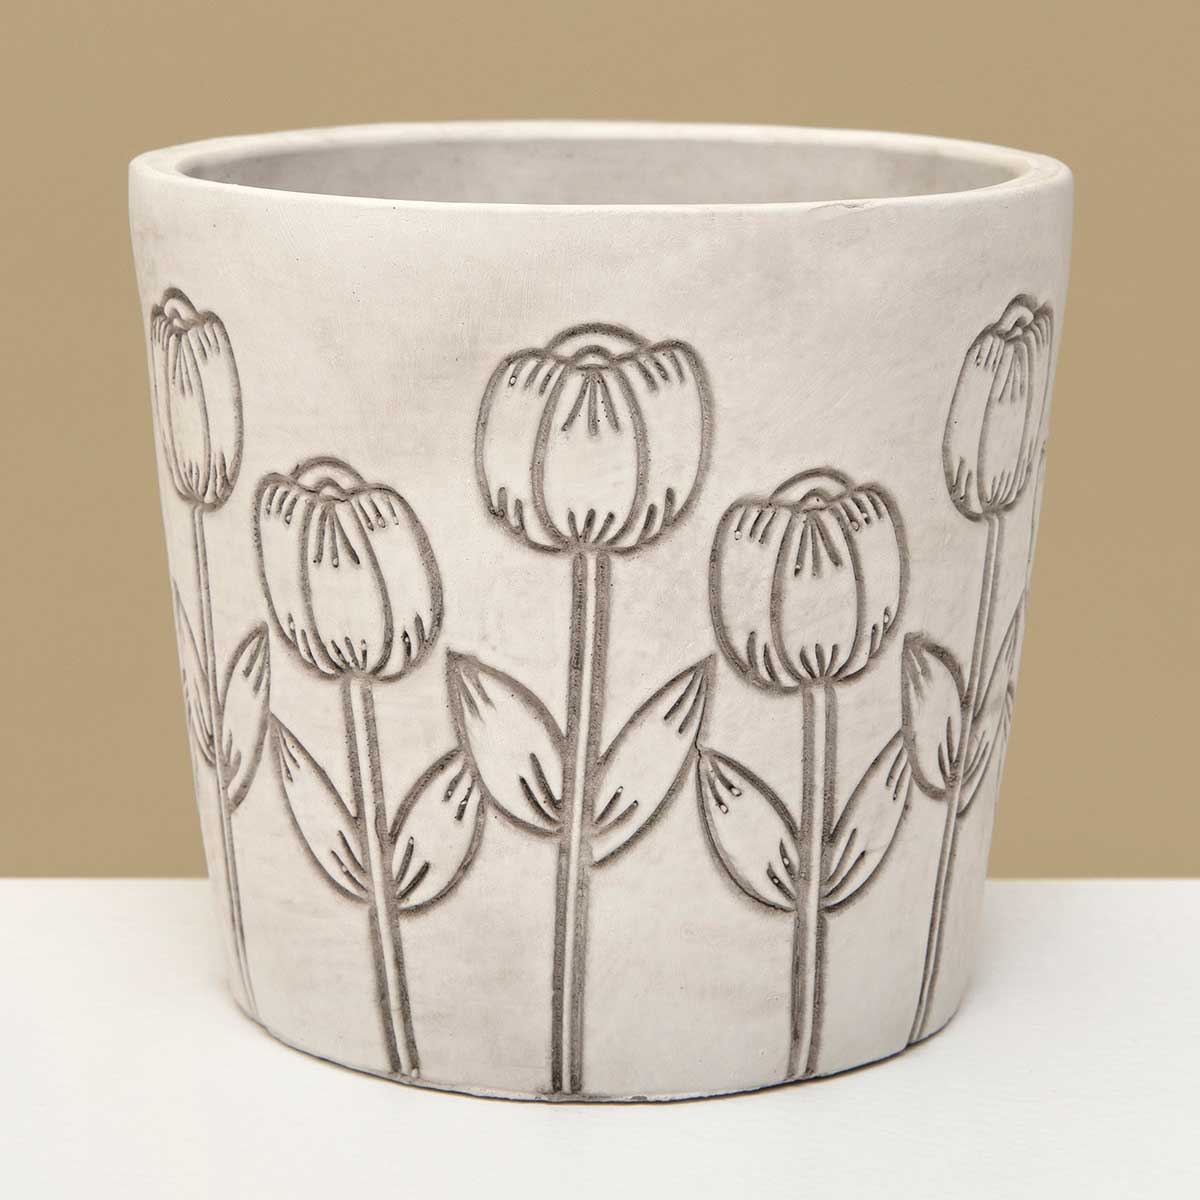 POT TULIP WHITE/DK GREY LARGE 5.5IN X 5IN CONCRETE - Click Image to Close